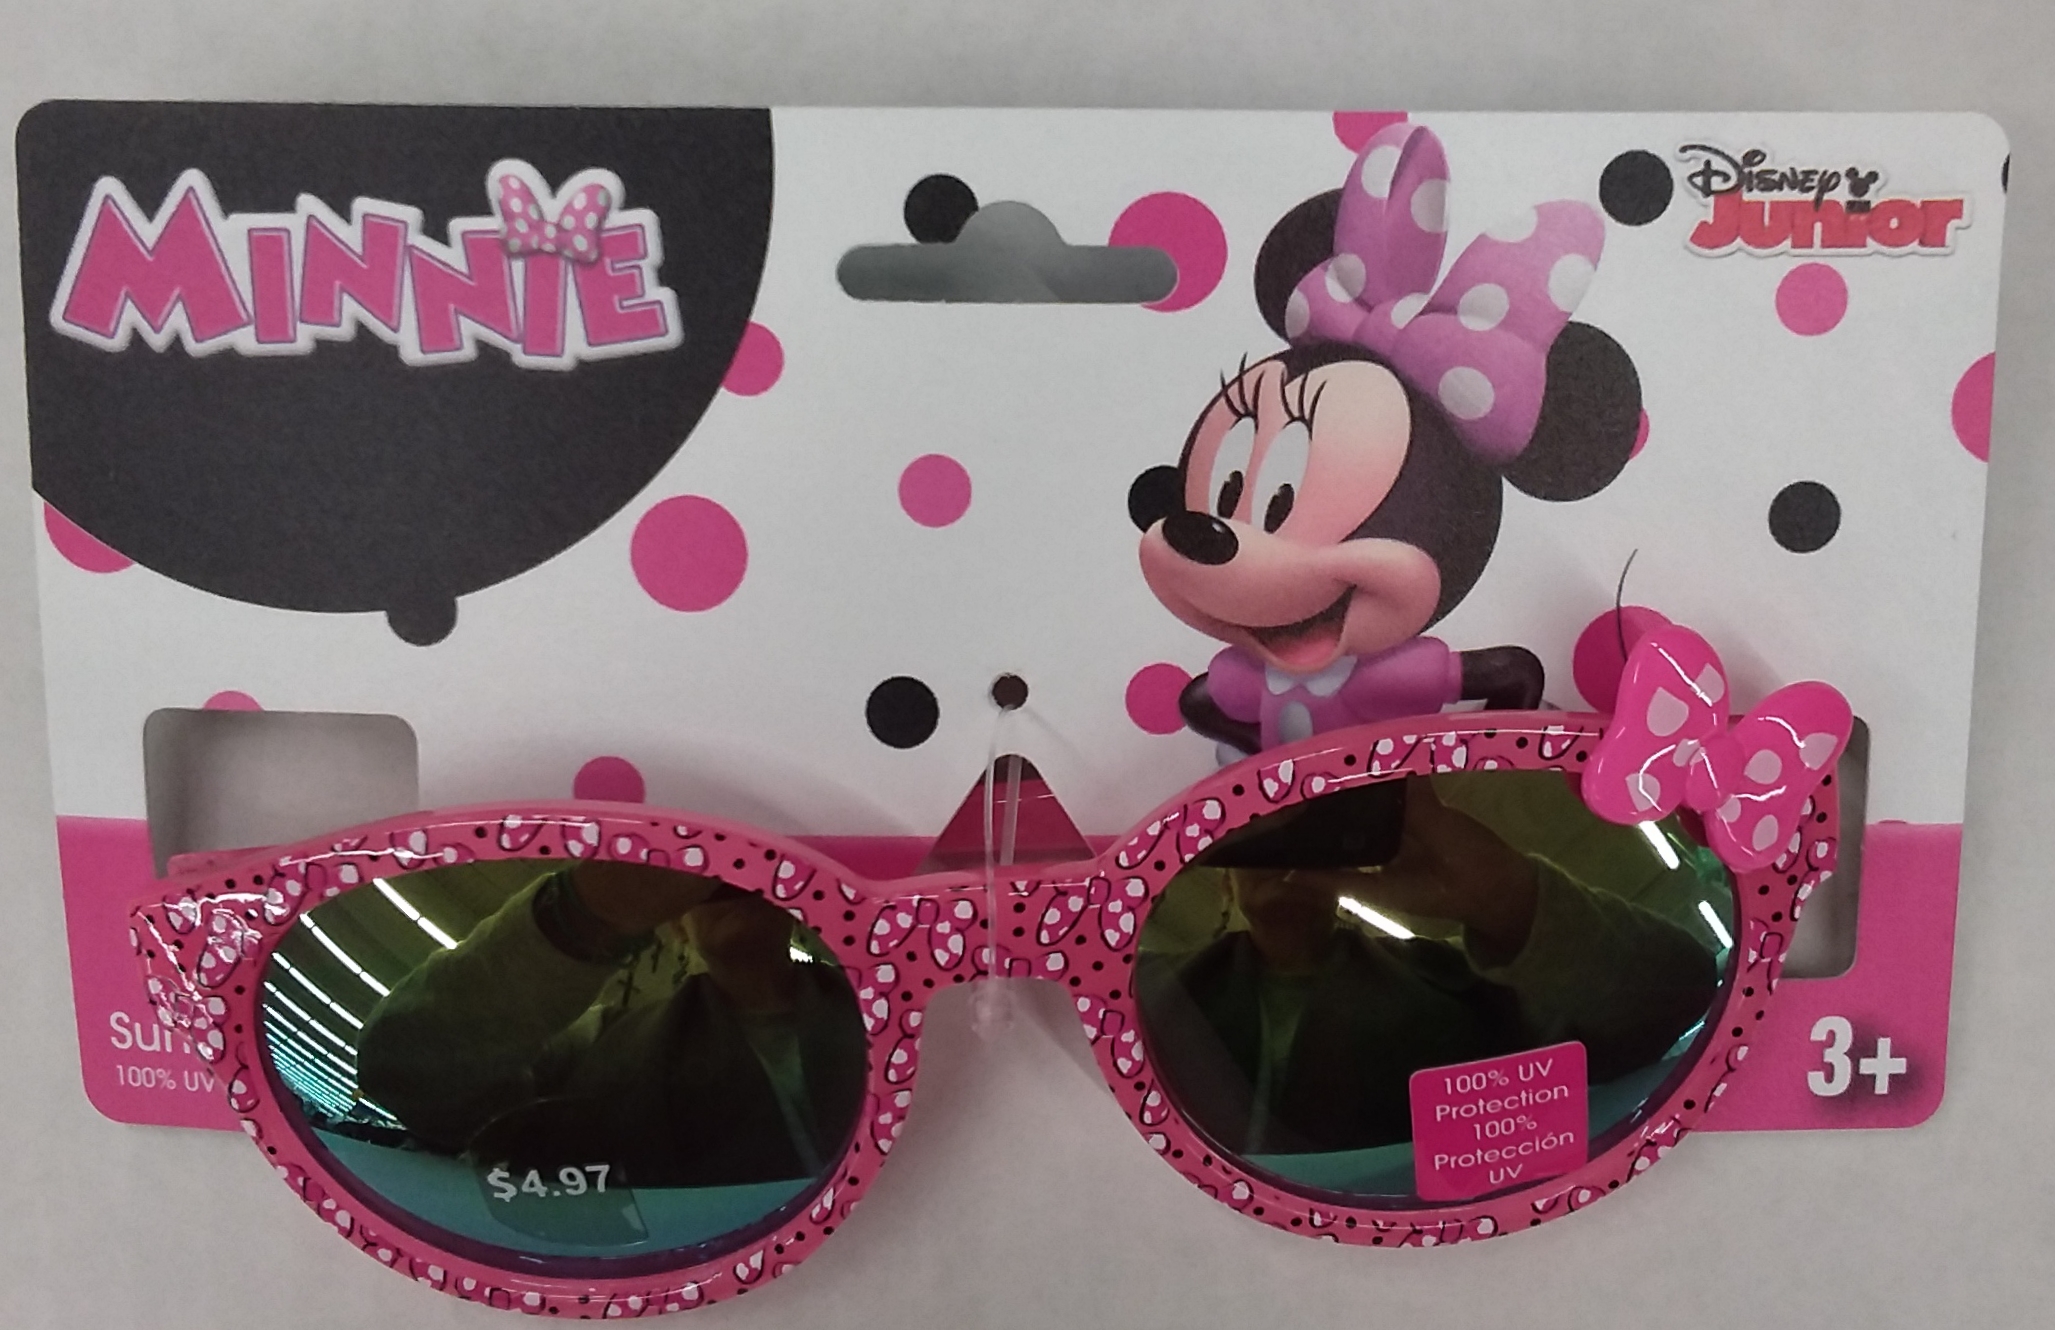 Disney Minnie Mouse Girl's Brow Bar Sunglasses Pink - image 3 of 3